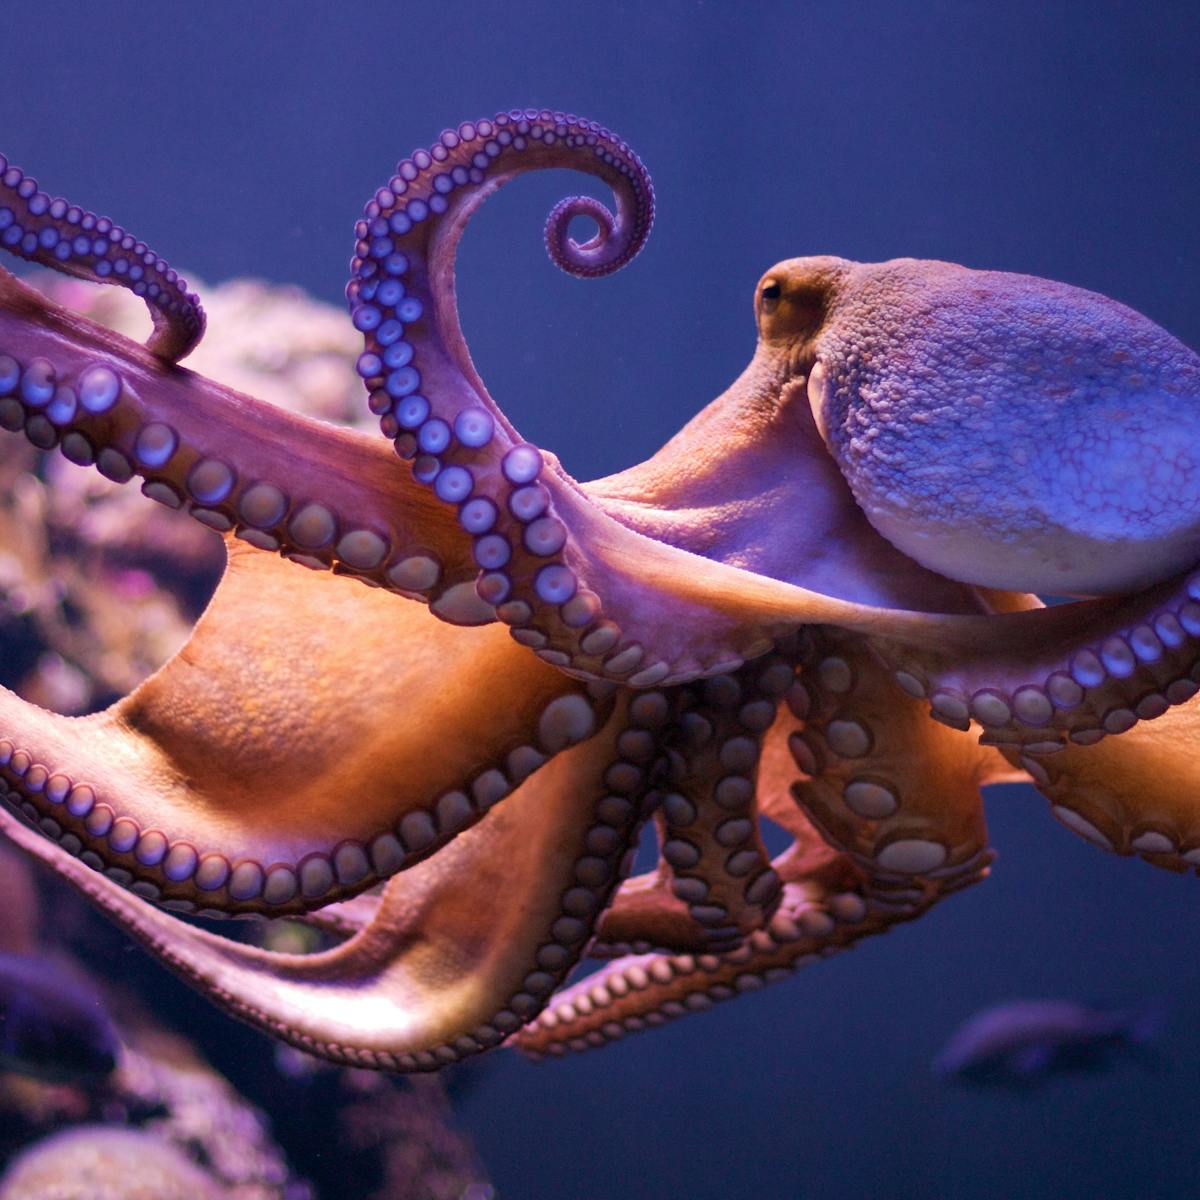 Suckers for learning: why octopuses are so intelligent